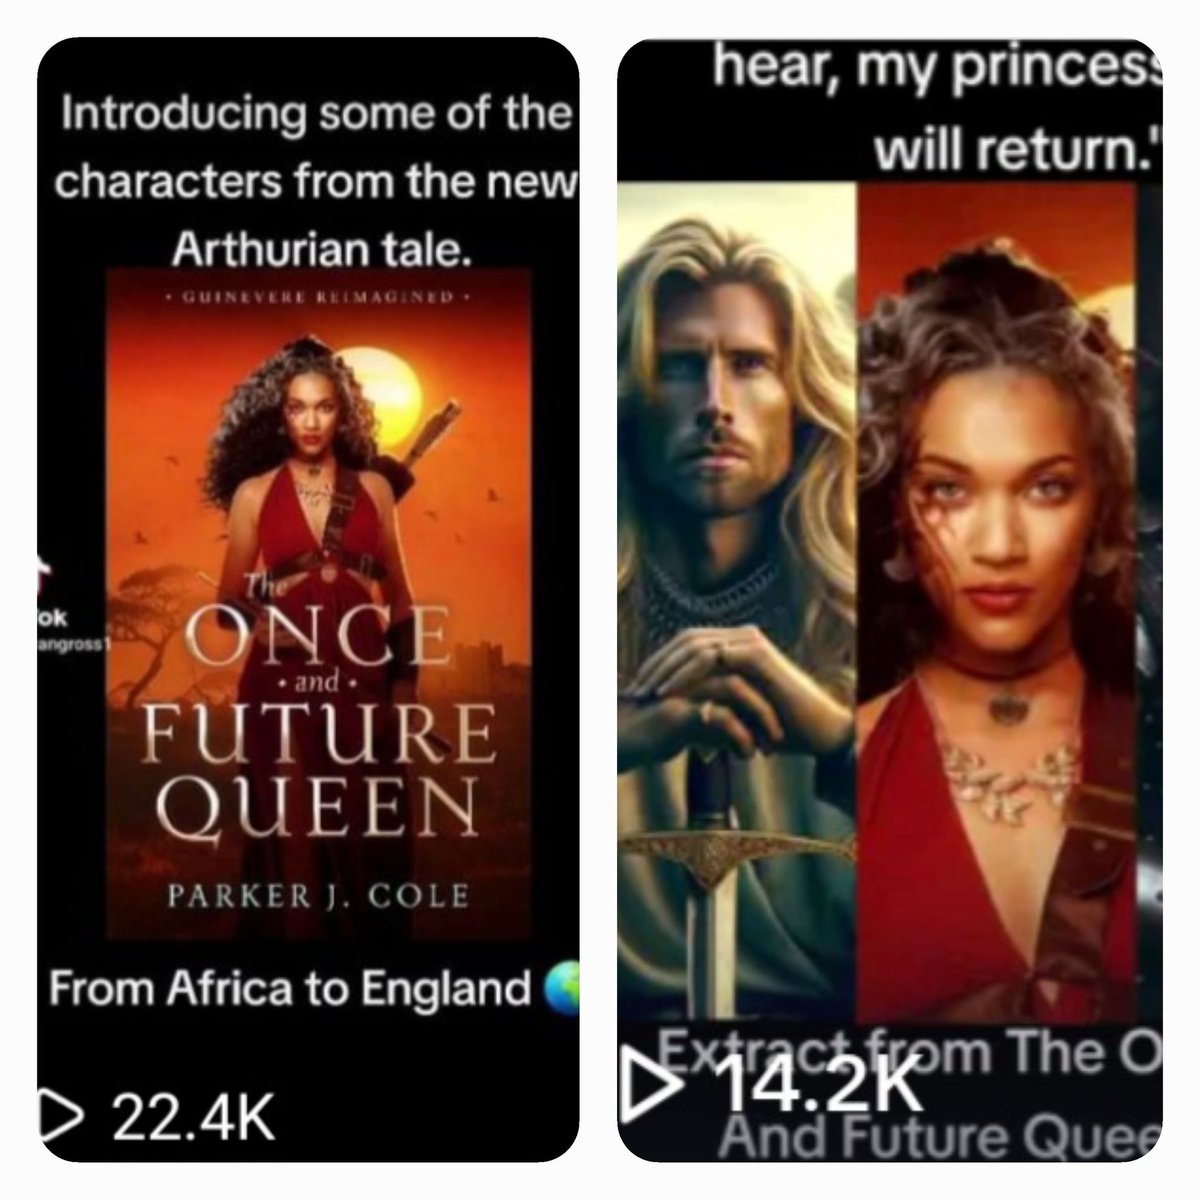 Thank you for the views on The Once And Future Queen, Guinevere Reimagined, by the talented @ParkerJCole

amazon.com/Once-Future-Qu…

#GodIsGood
#HistoricalFiction 
#HistoricalRomance 
#mustreadbook 
#africankingdom
#arthurianlegend
#arthurian